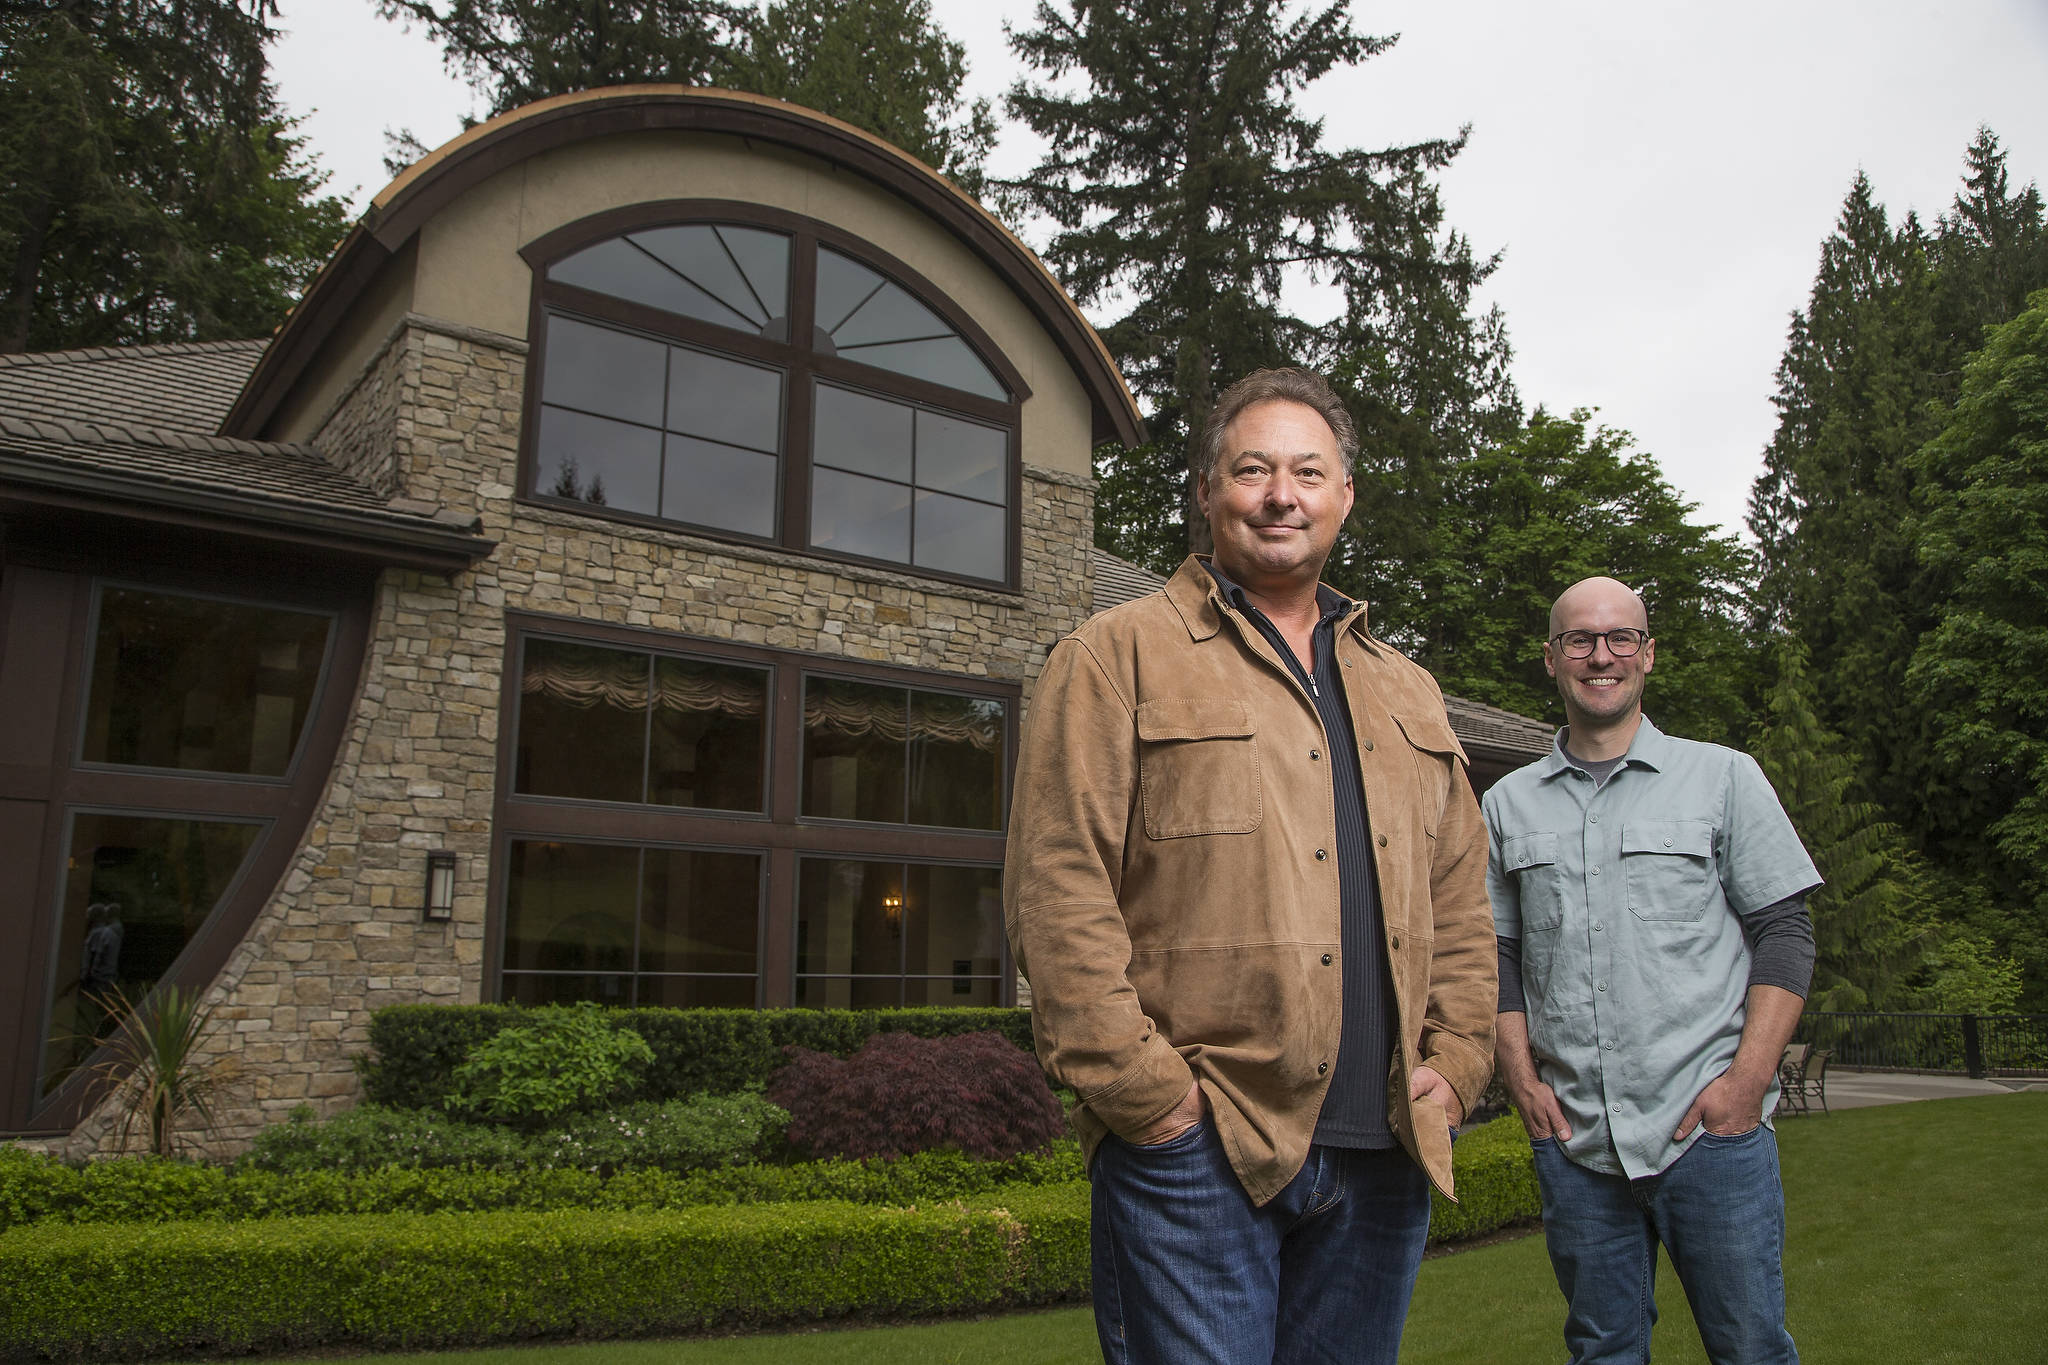 Paul Golitzin, president and director of winemaking, with winemaker Alex Stewart at Quilceda Creek Winery & Cellar on Monday, May 17, 2021 in Snohomish, Washington. (Andy Bronson / The Herald)